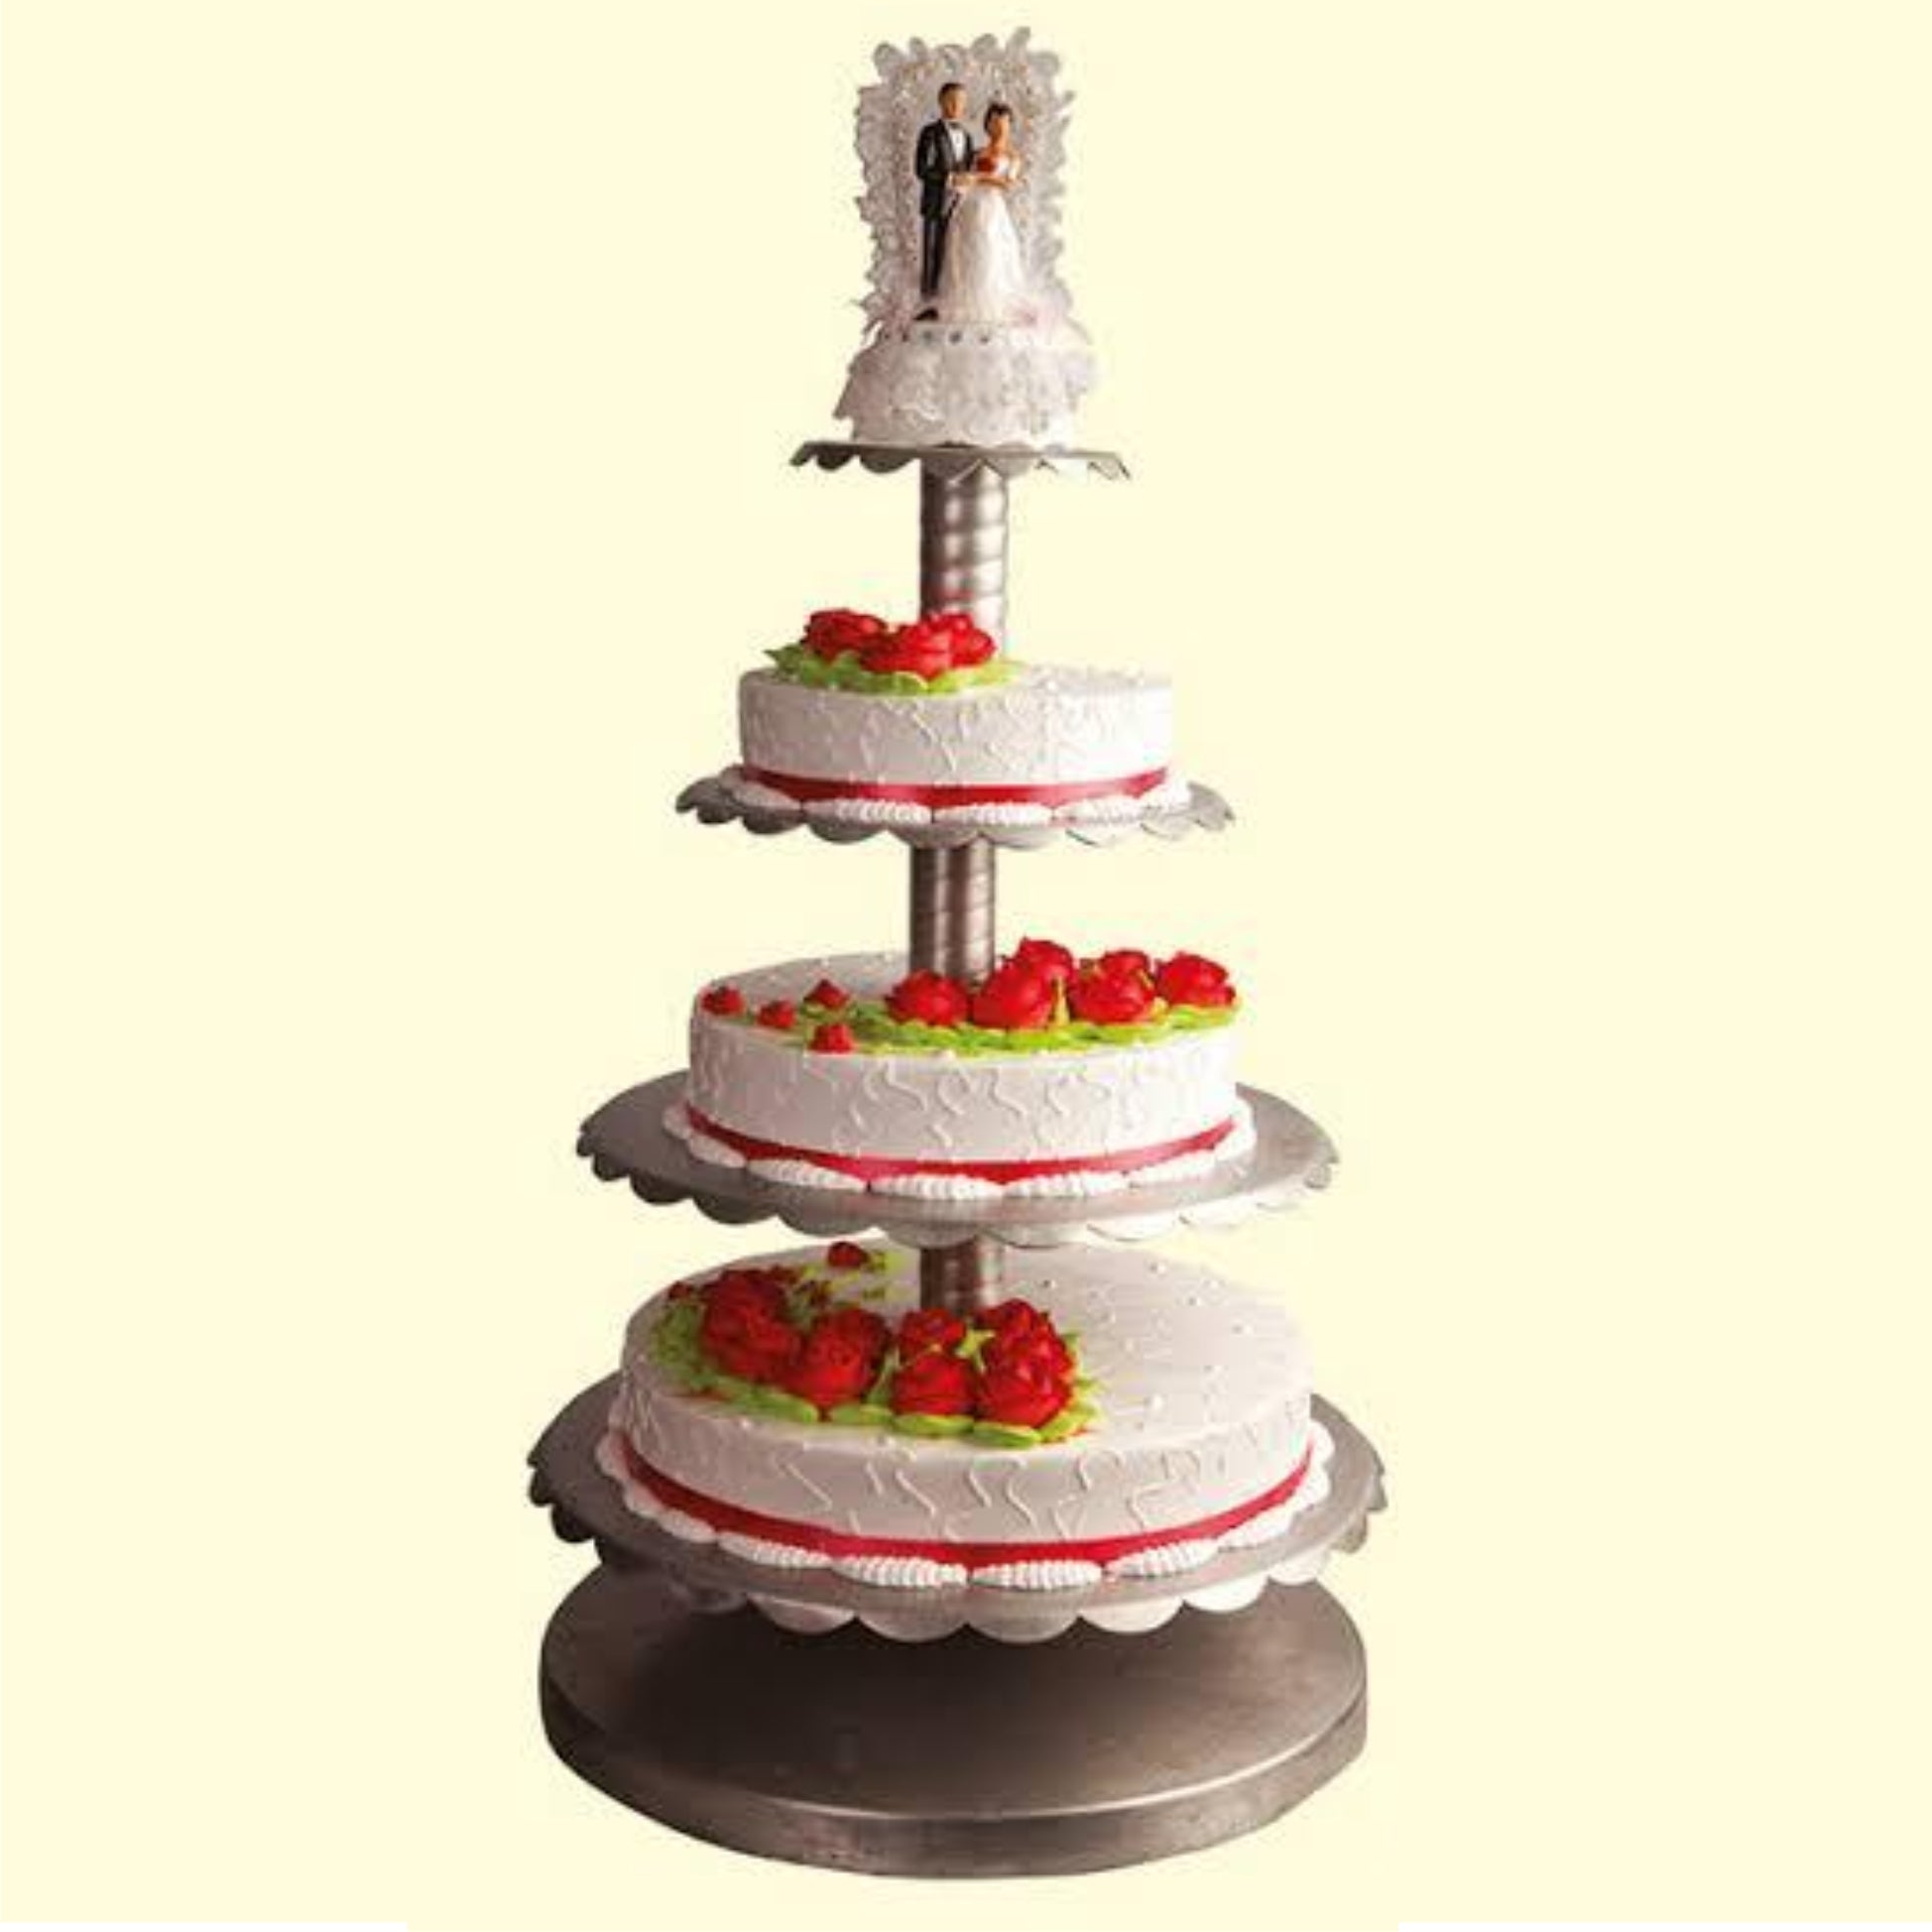 Buy Two Set of Three Tier Cake Stand and Fruit Plate by Imillet -Stainless  Steel Stand of Golden for Cakes Desserts Fruits Candy Buffet Stand for  Wedding &Home&Party Serving Platter (2 Pack)